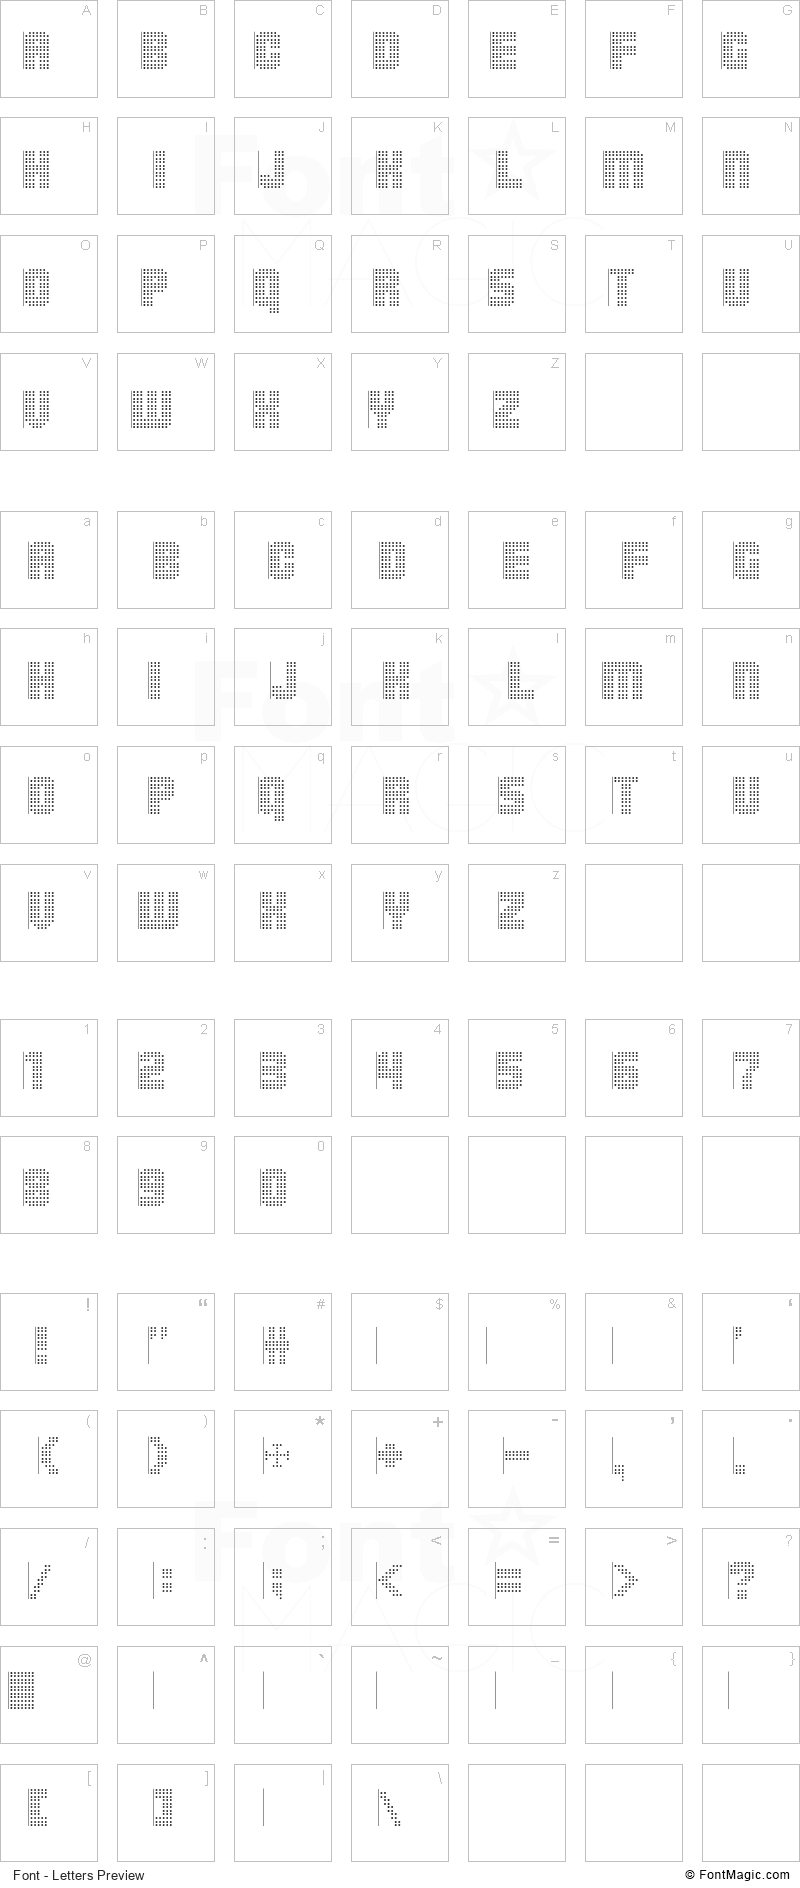 Pointer Sisters Font - All Latters Preview Chart